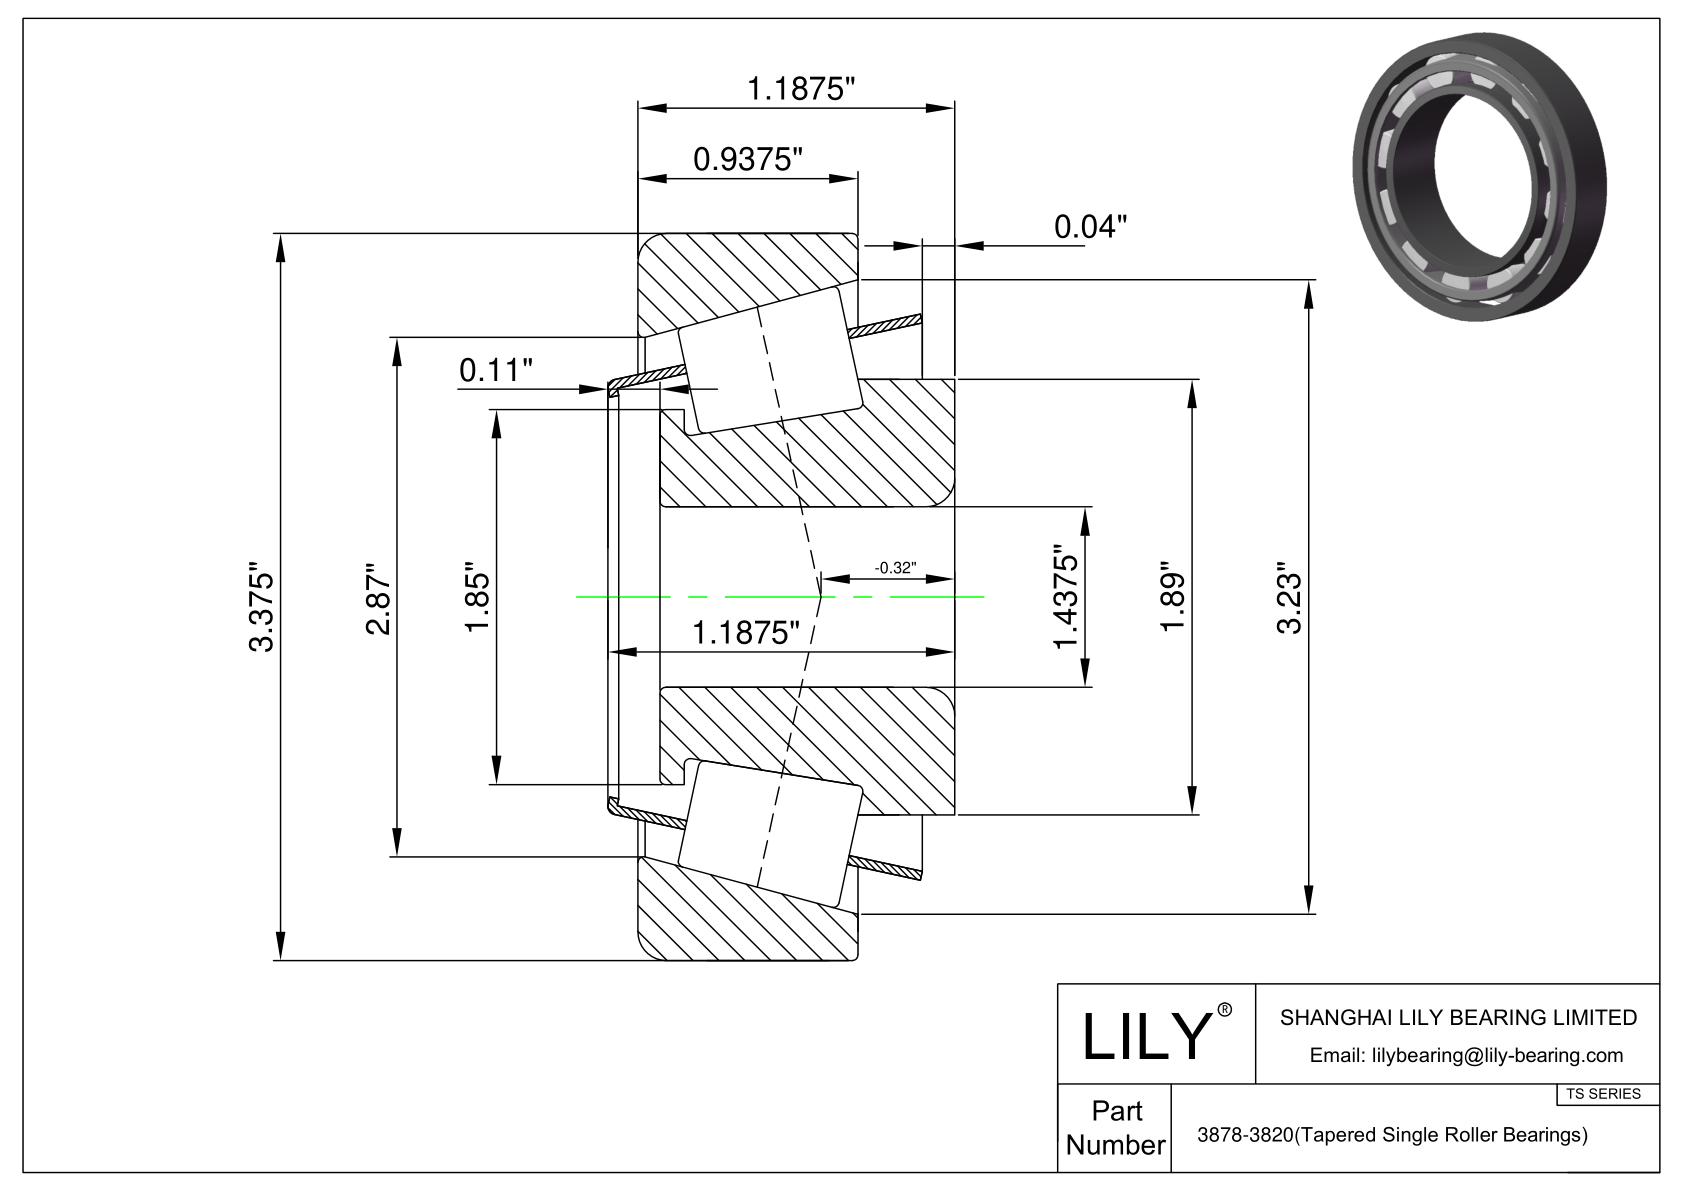 3878-3820 TS (Tapered Single Roller Bearings) (Imperial) cad drawing